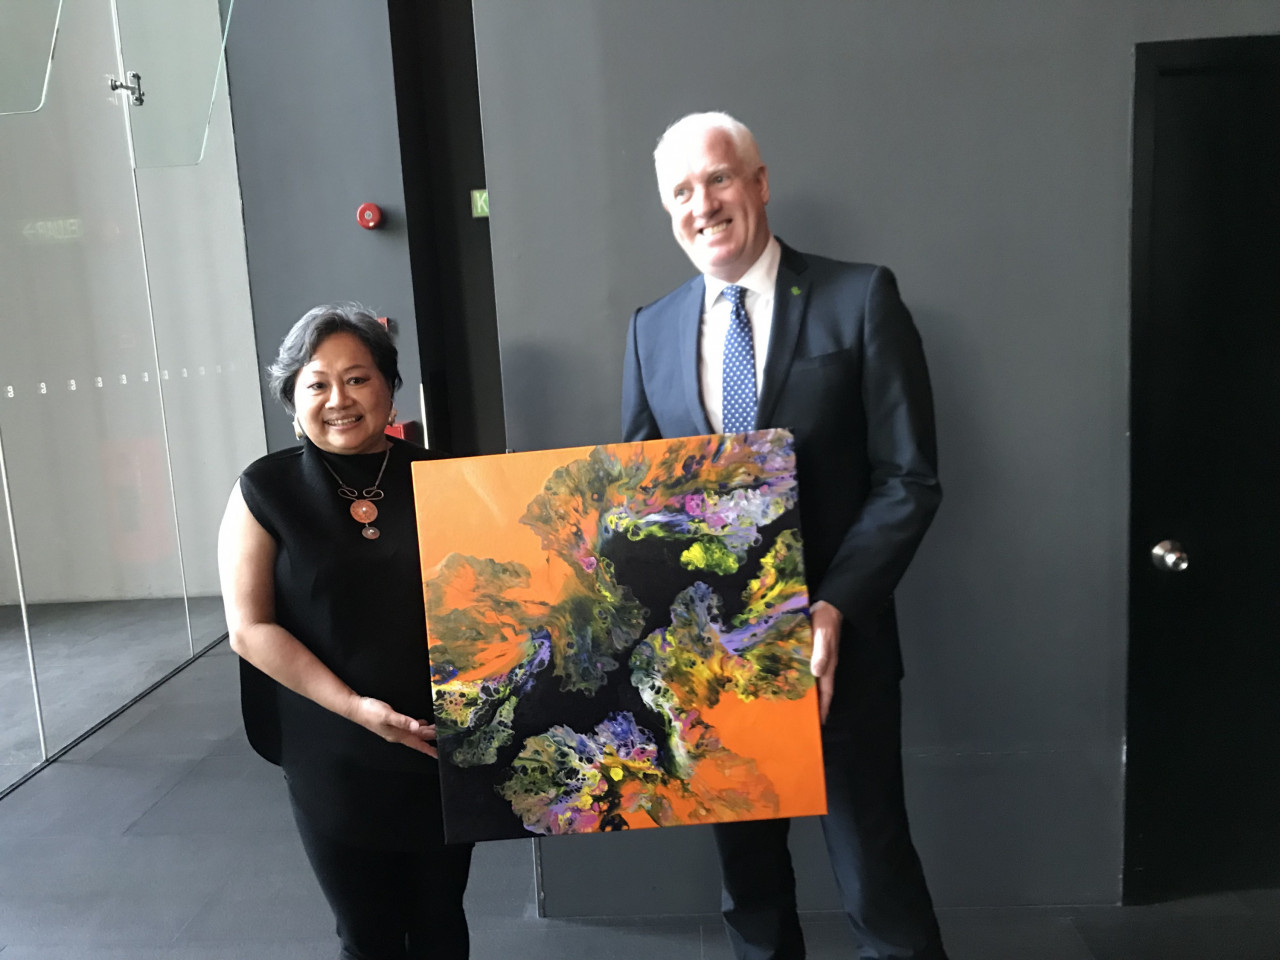 Tina gifting an art piece to G Hotel general manager Michael Hanratty. – Rachel Yeoh pic